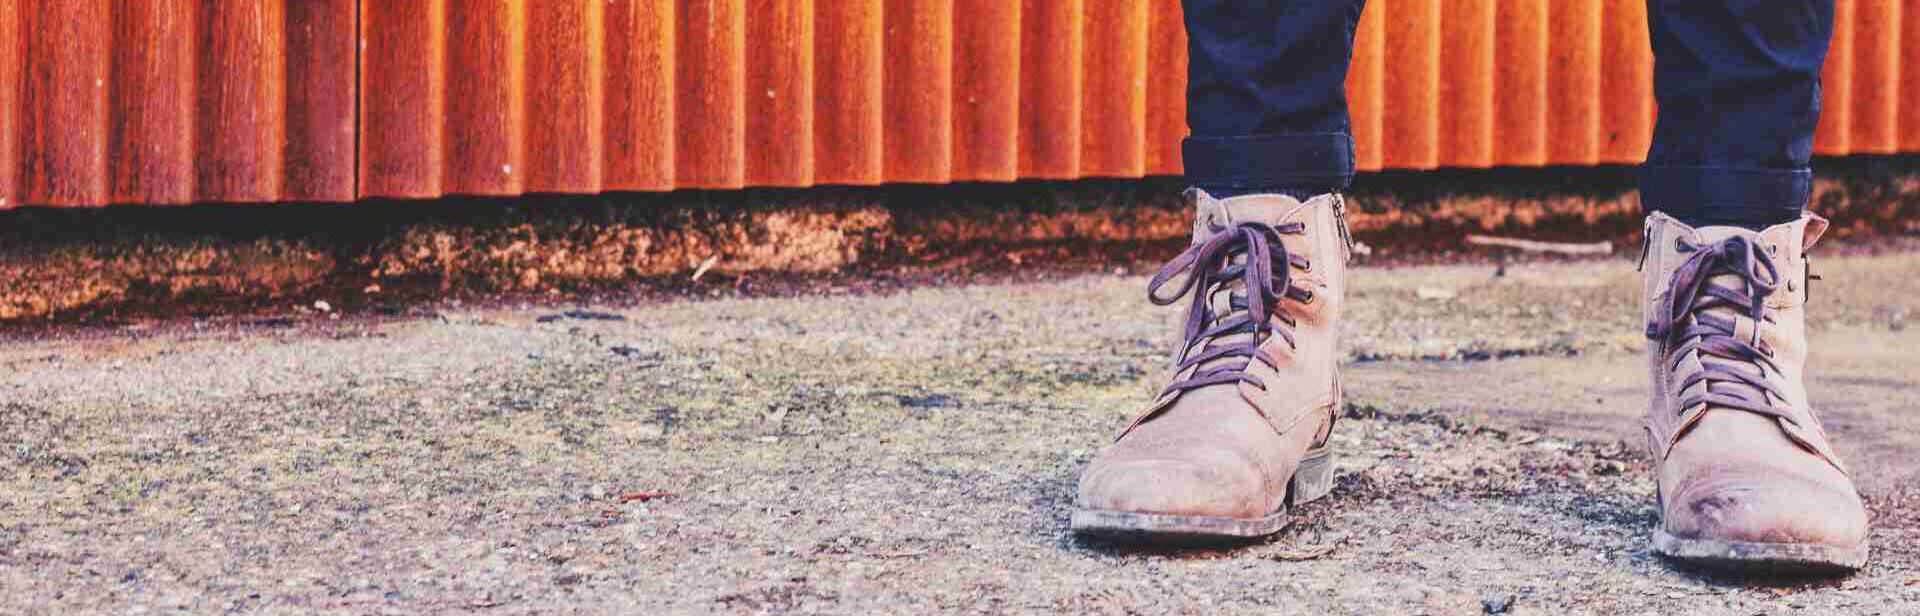 2 legs in jeans with dusty working boots on a gravel trail in front of an orange rusty wavey wall. The picture is cut vertically before the knees.